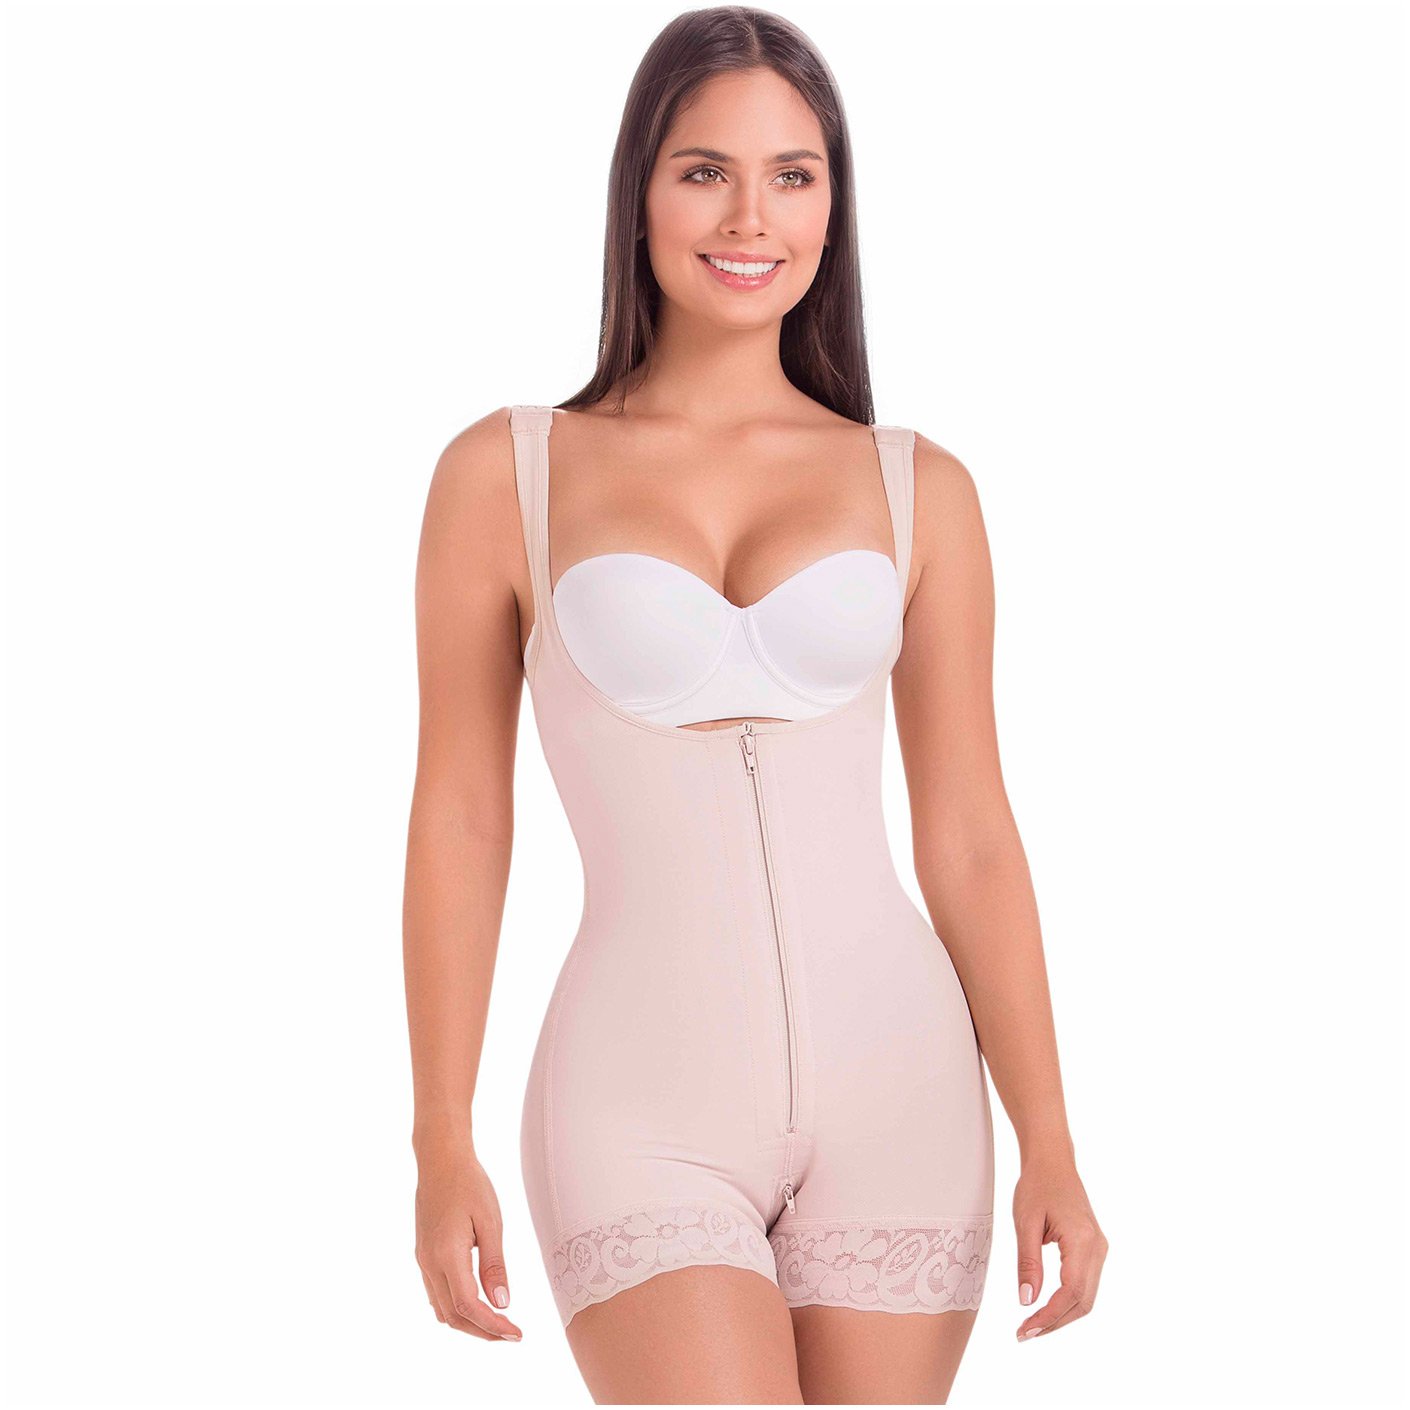 MariaE 9831 Body Shaper for Daily Use / Open Bust with Front Zipper